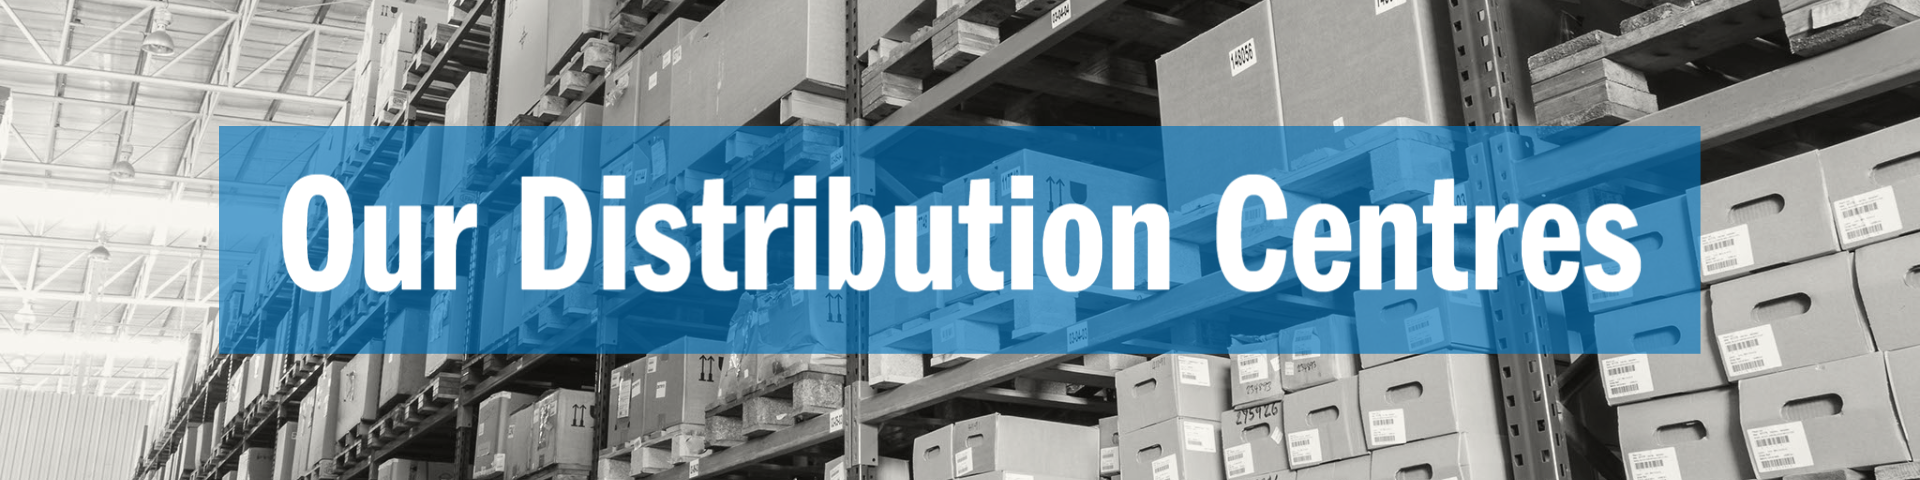 Our Distribution Centres